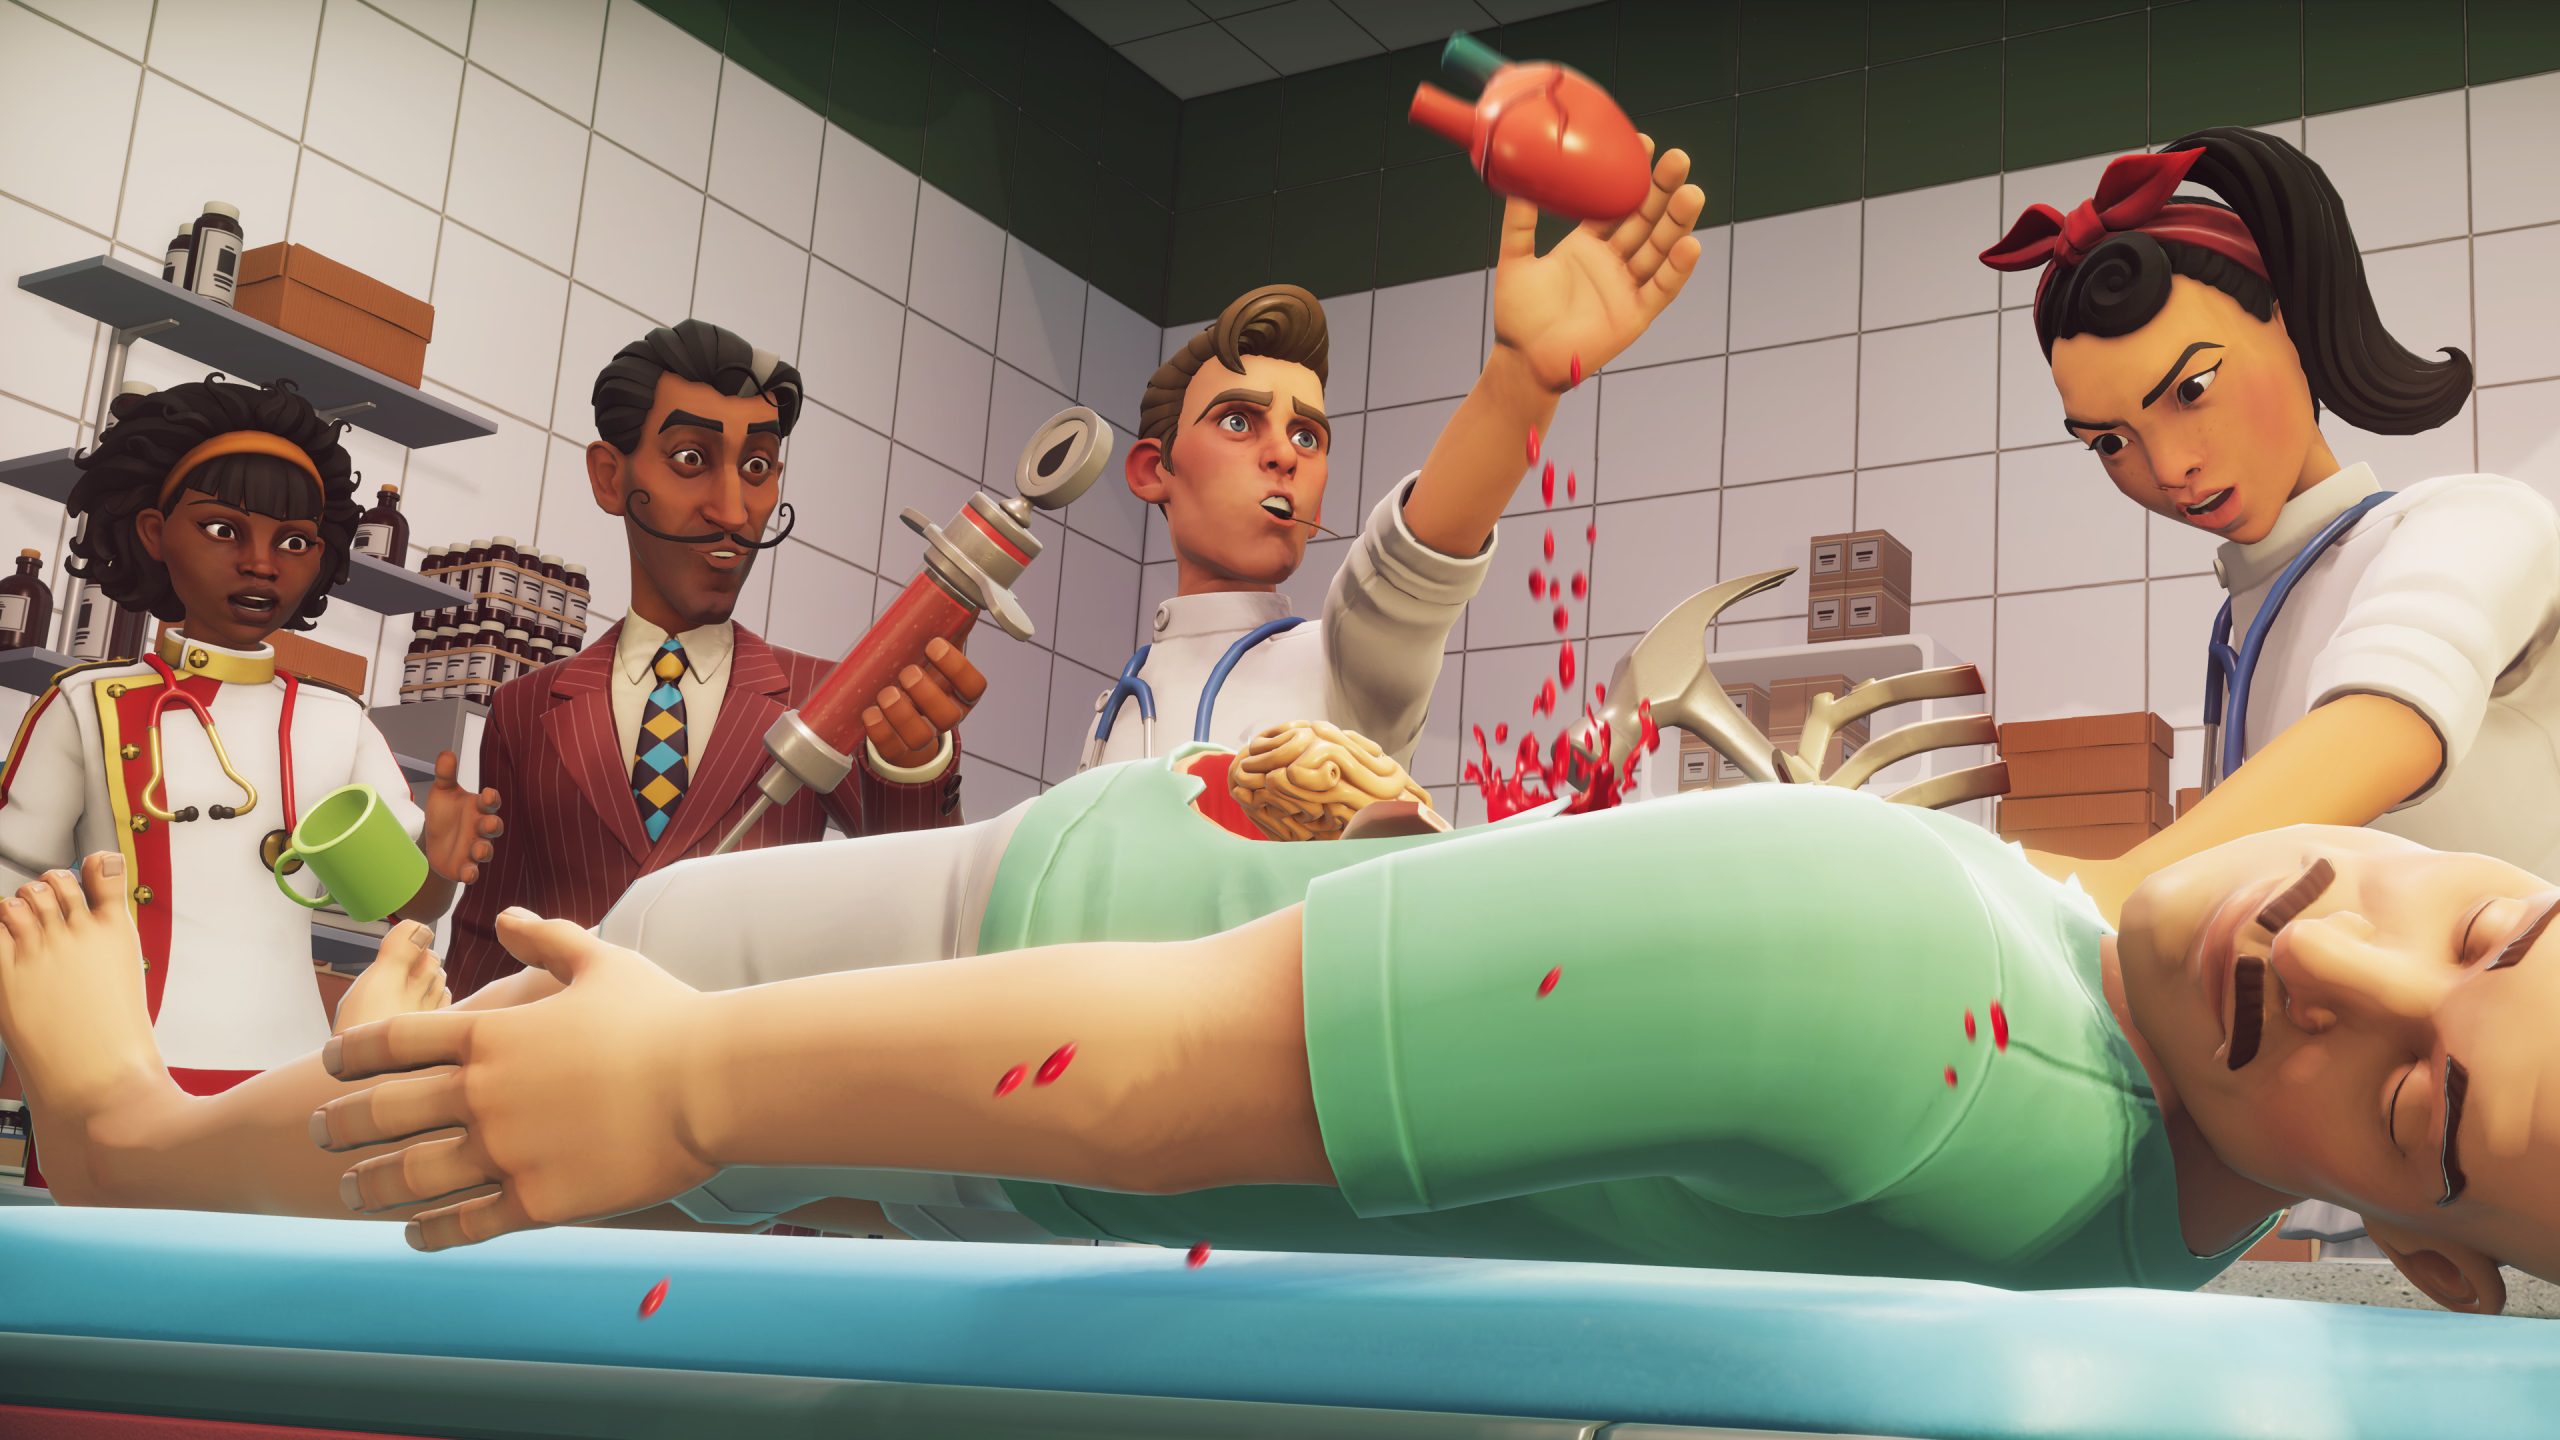 Atari Relaunches Infogrames, Acquires Surgeon Simulator Series to Diversify Game Lineup and Expand Market Presence